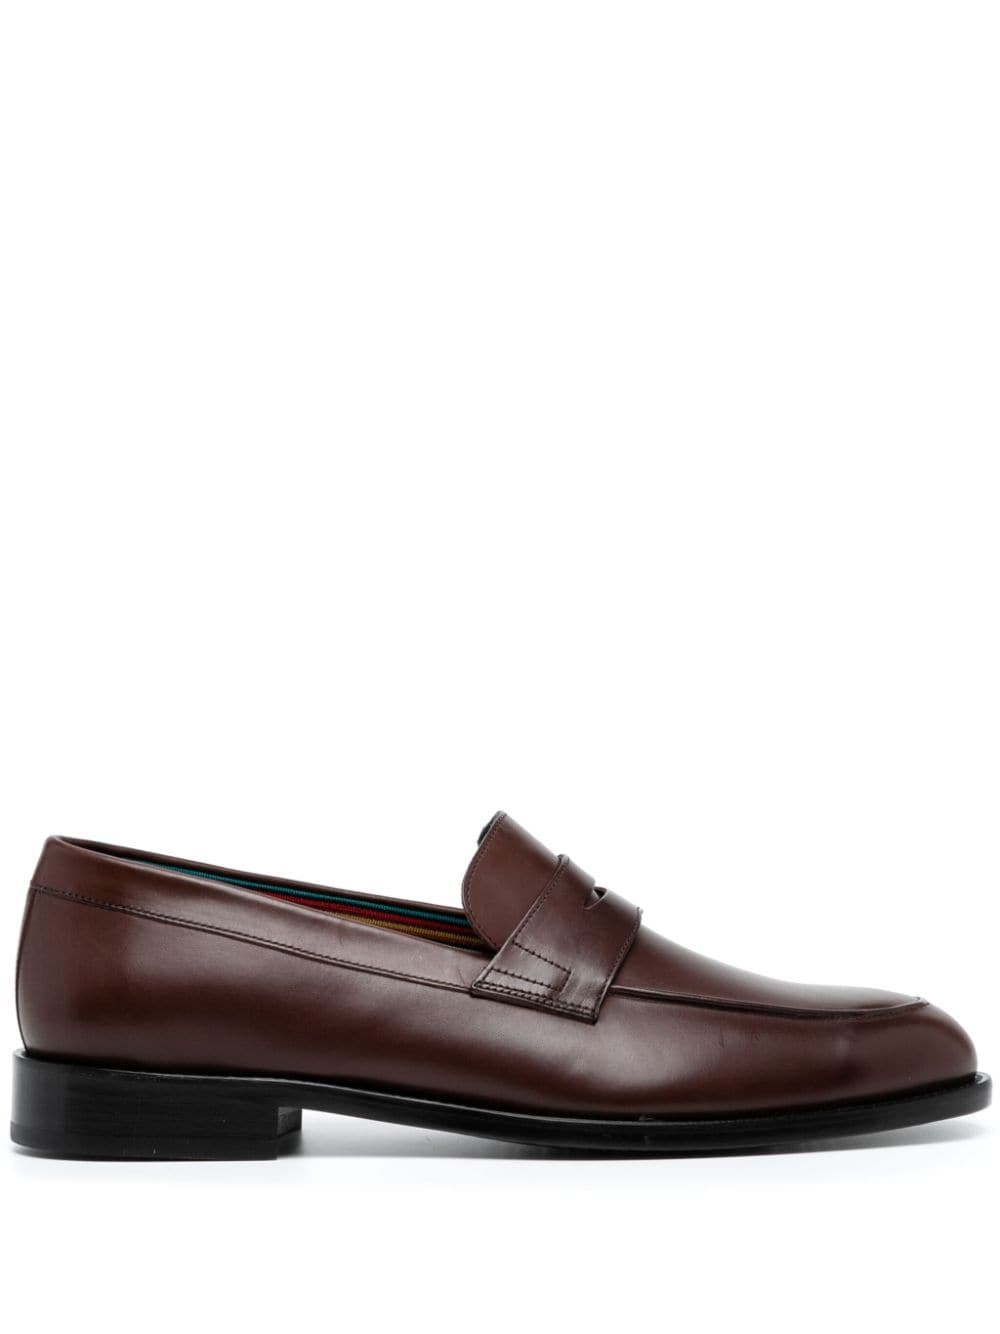 Paul Smith Montego leather penny loafers - Brown von Paul Smith